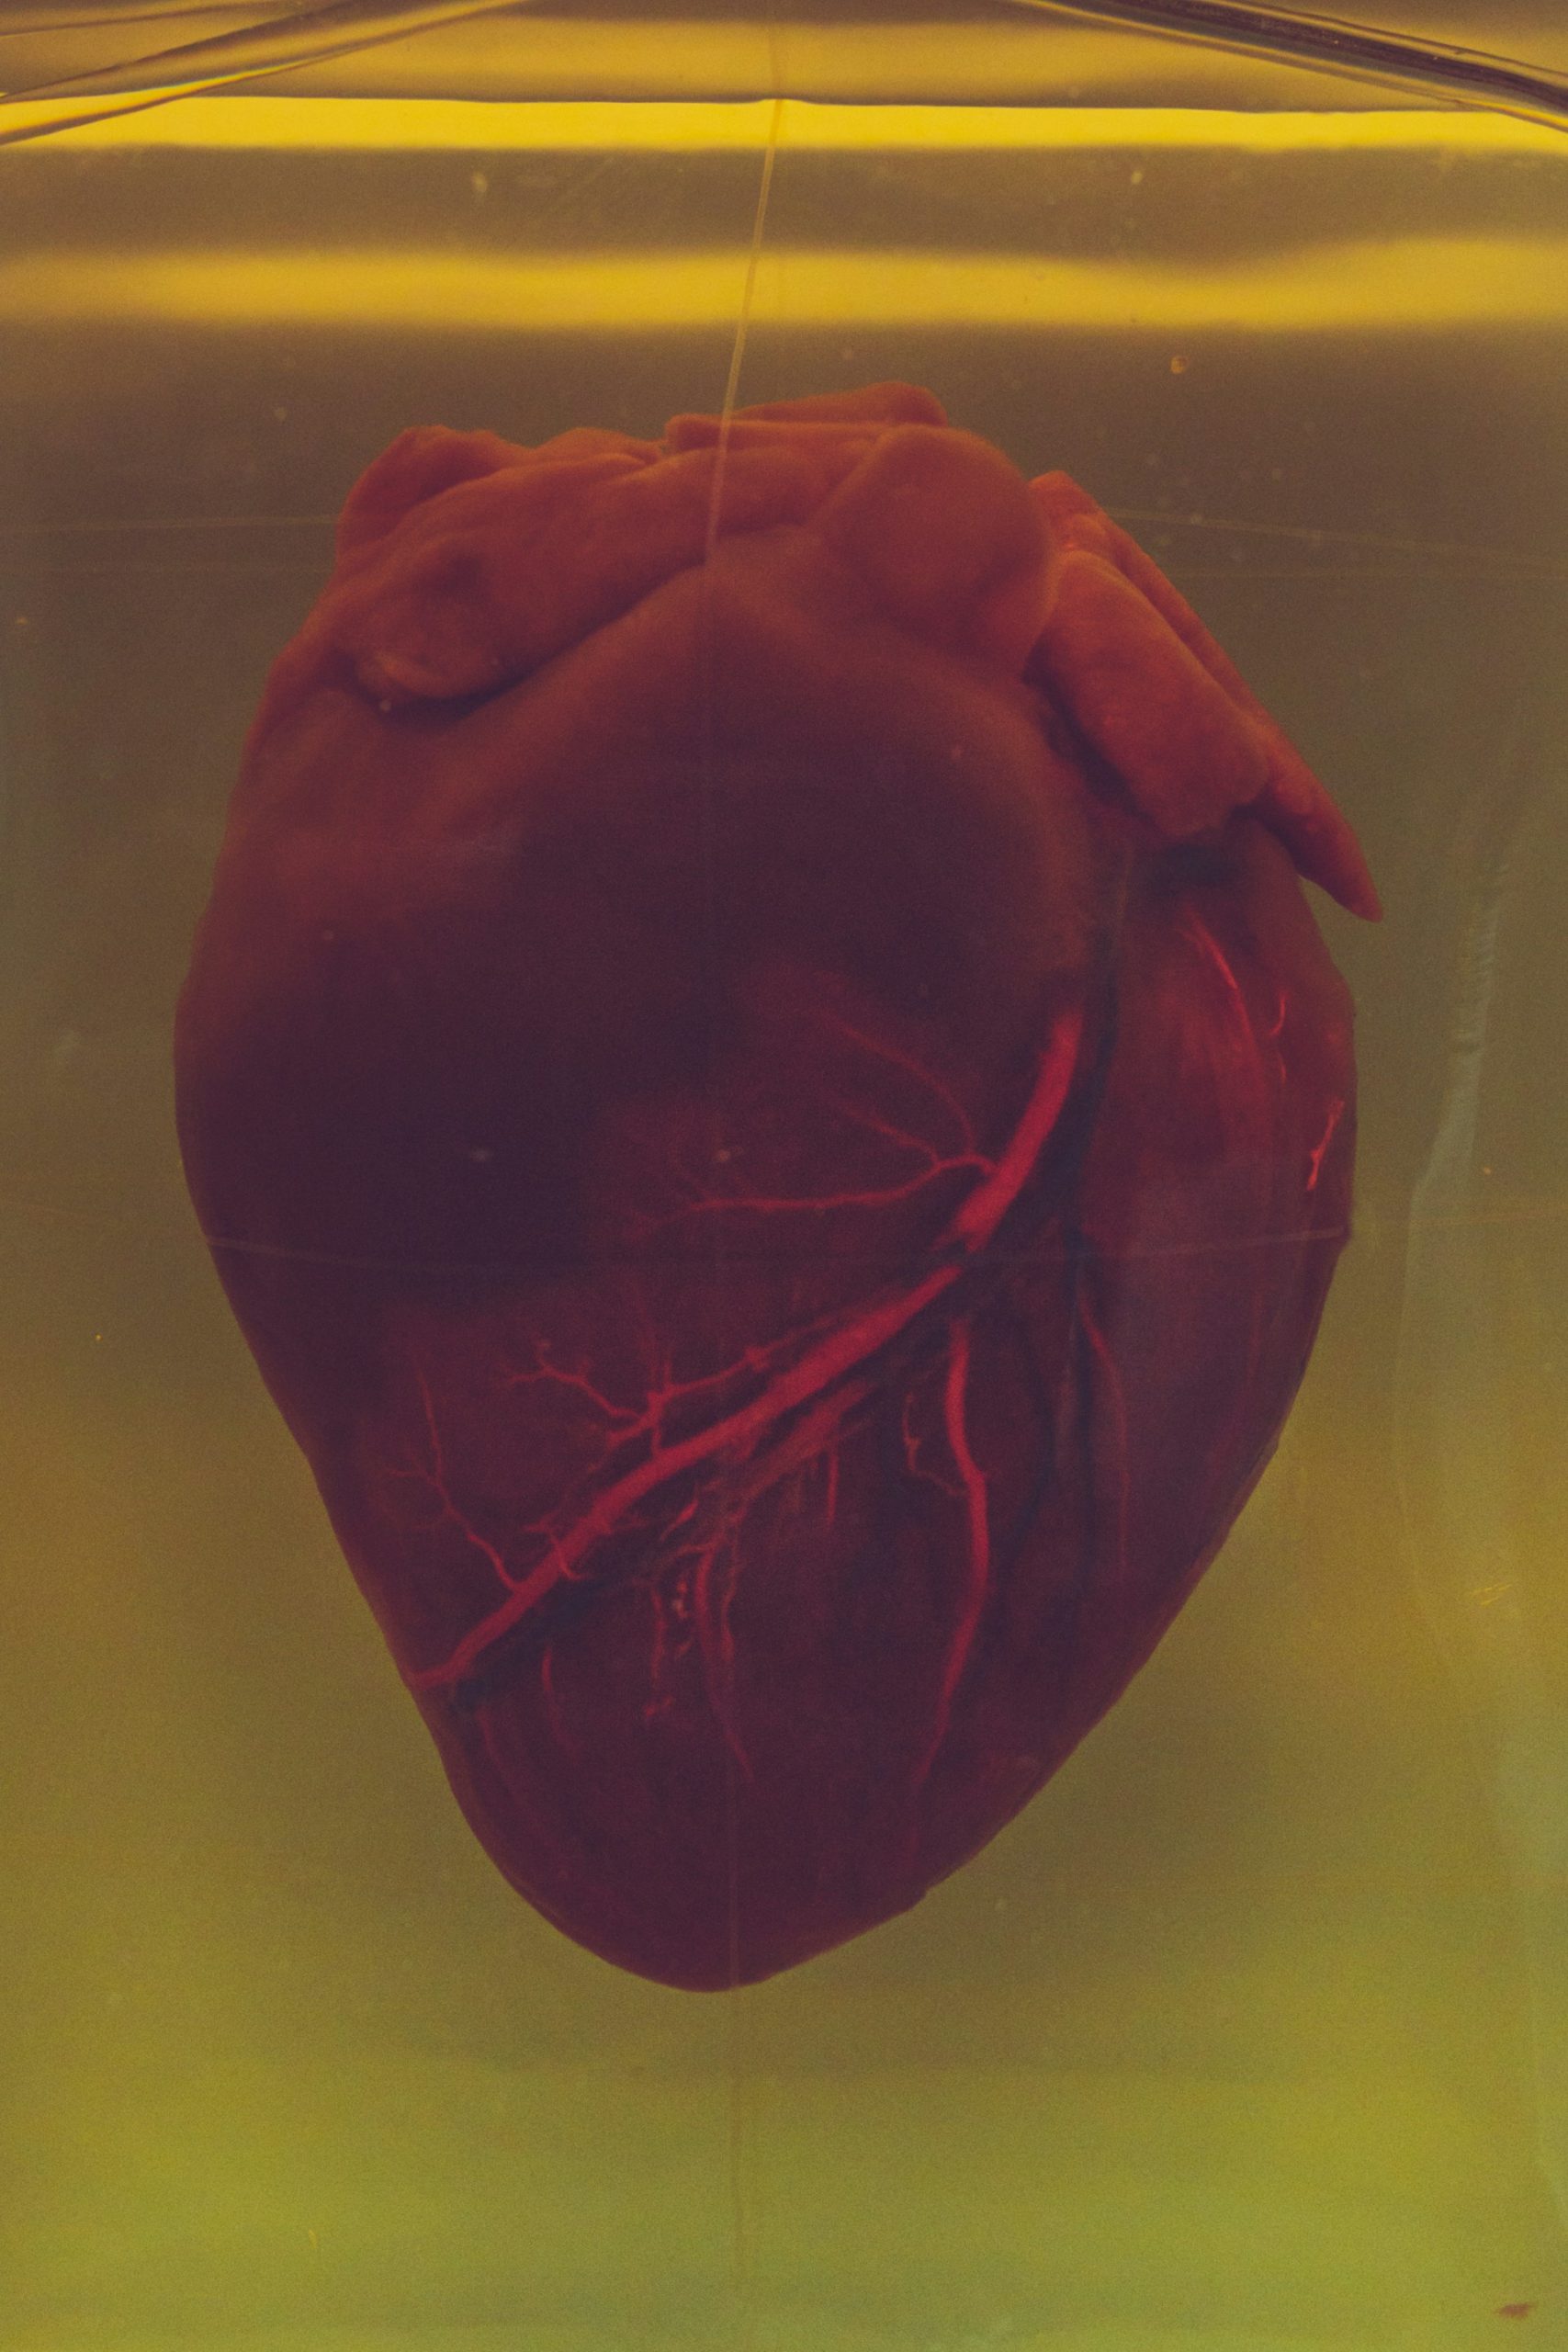 Researchers have created hyper-realistic models of diseased hearts to help train transplant surgeons